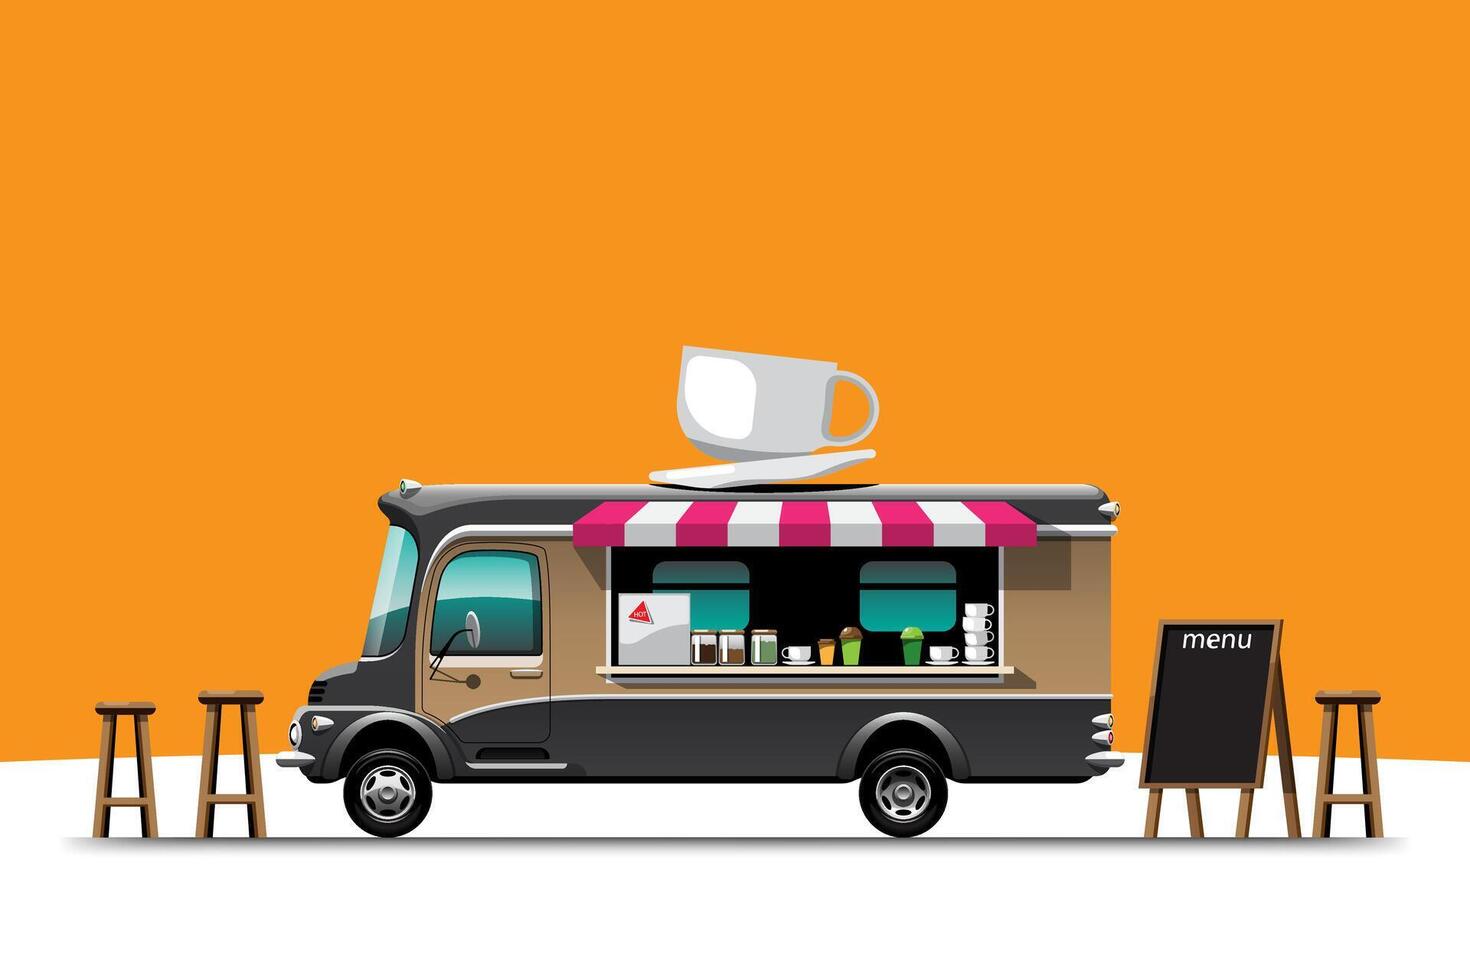 The food truck side view menu coffee wooden chair vector